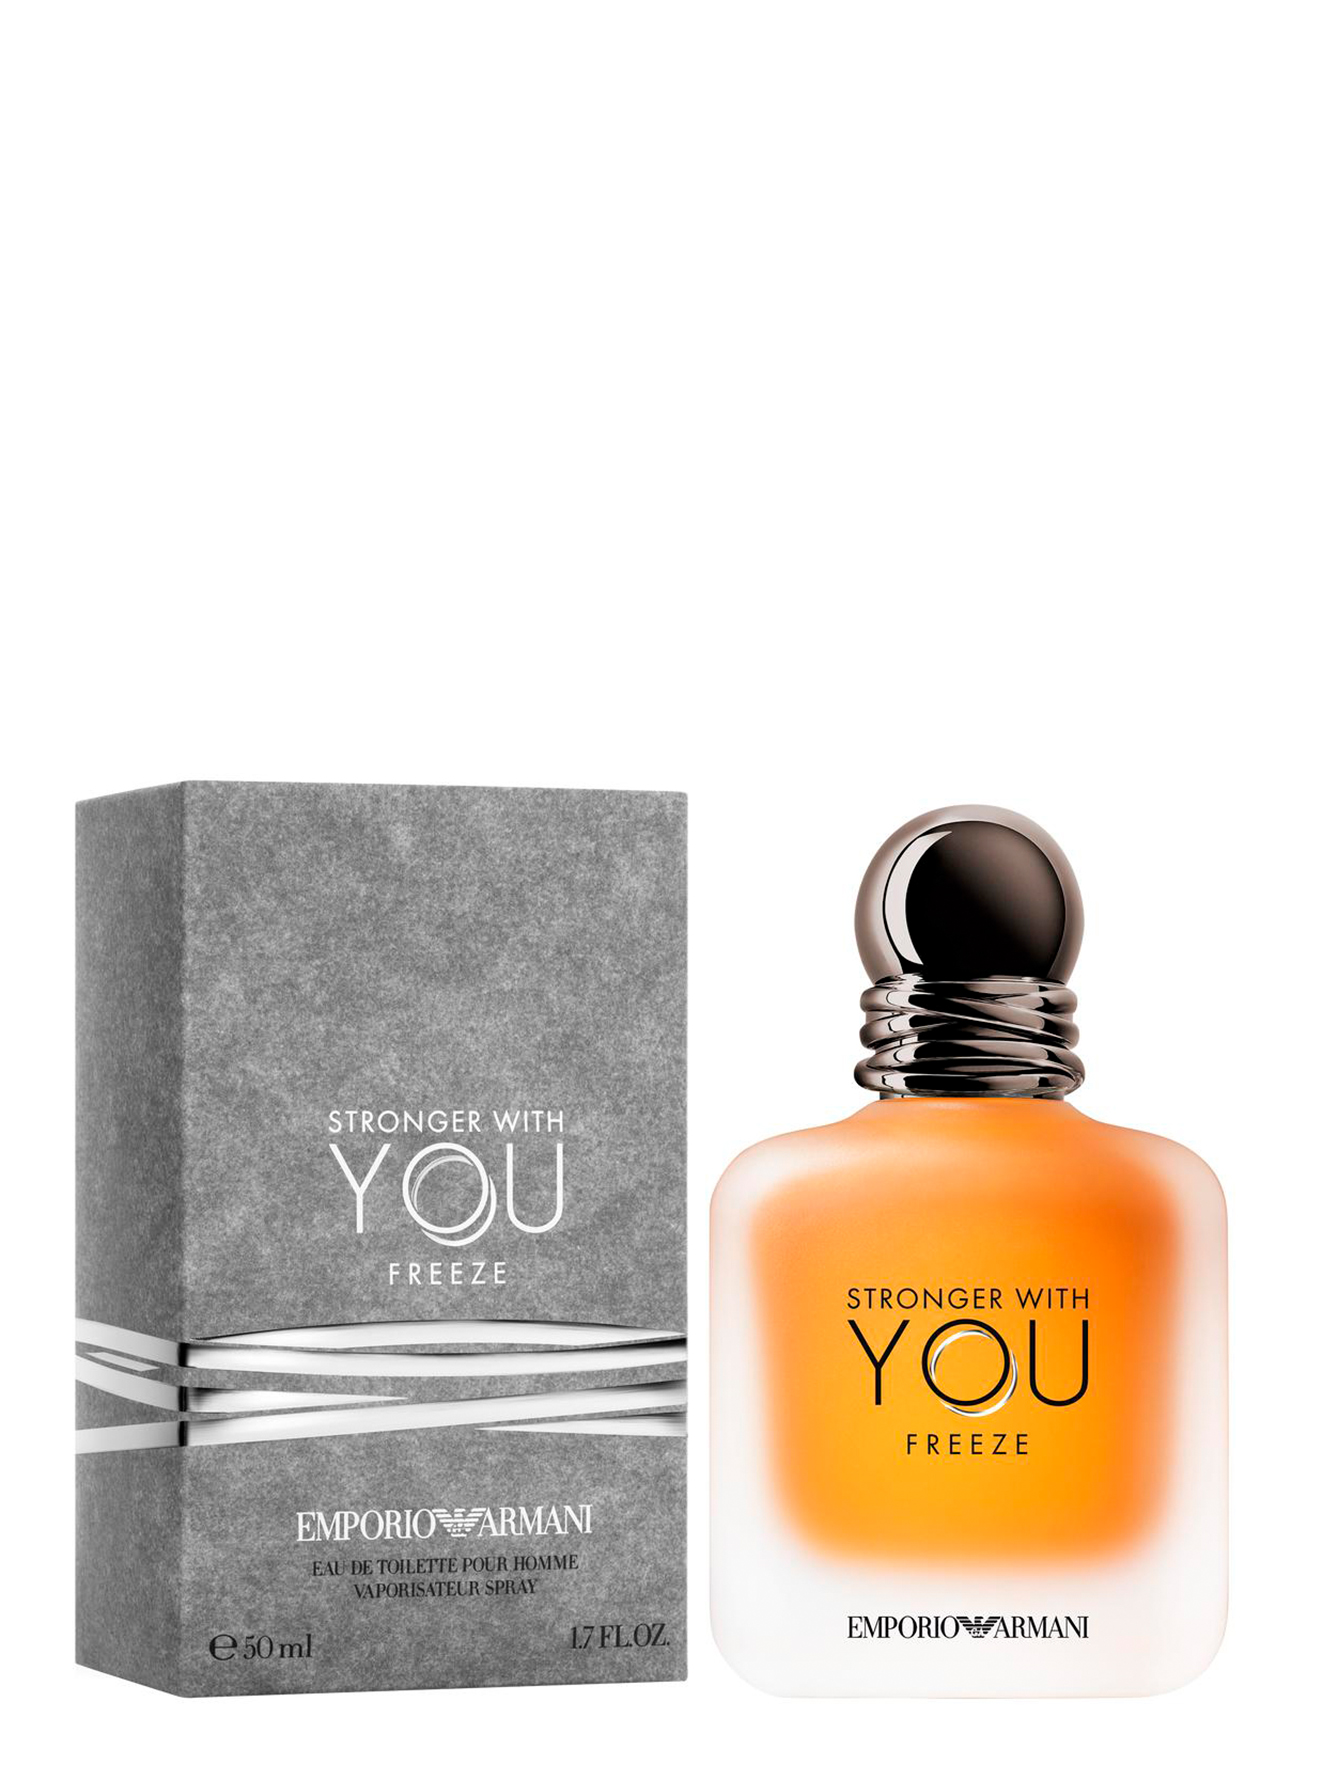 Туалетная вода strong. Emporio Armani stronger with you 15 ml. Emporio Armani stronger with you Freeze 100 ml. Armani Emporio stronger with you 100ml EDT. Эмпорио Армани духи мужские stronger with you.